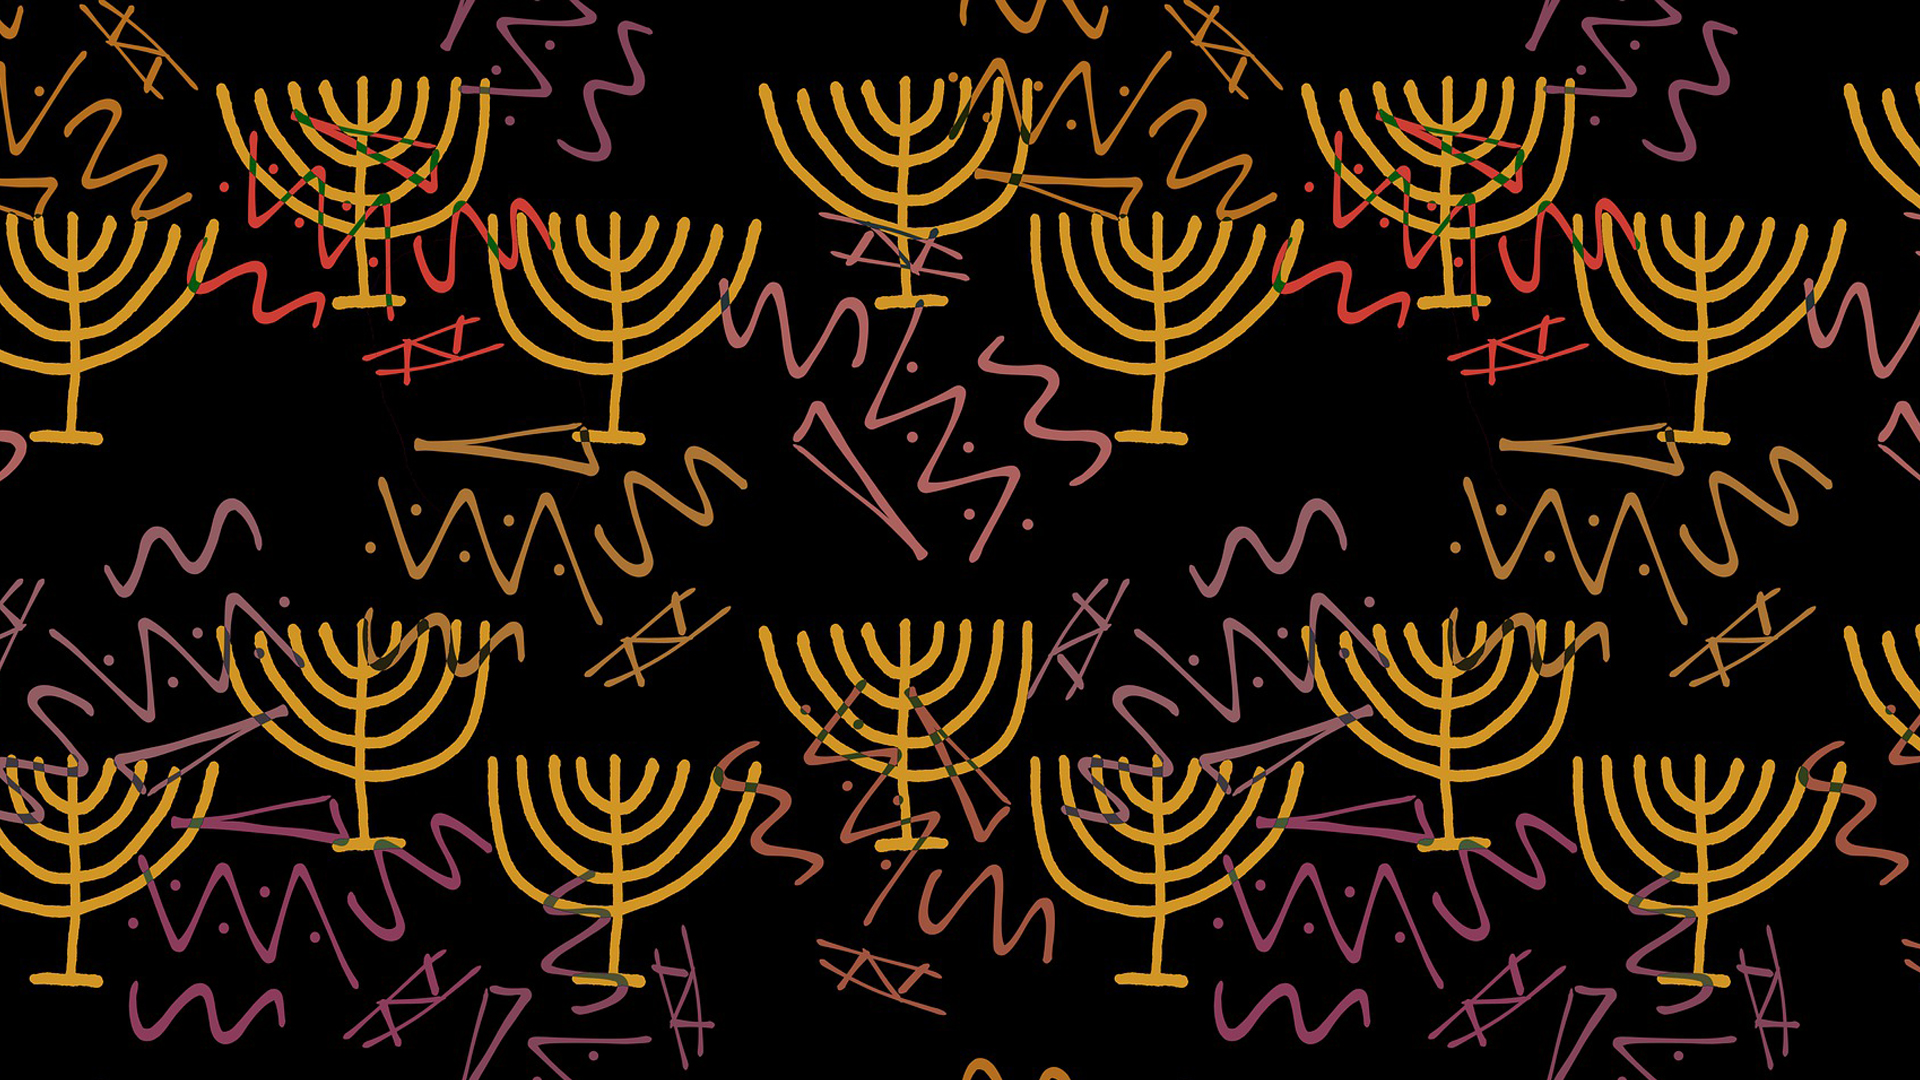 Happy Hanukkah. Black background with yellow menorahs and squiggly pink, tan, and orange graphic elements.